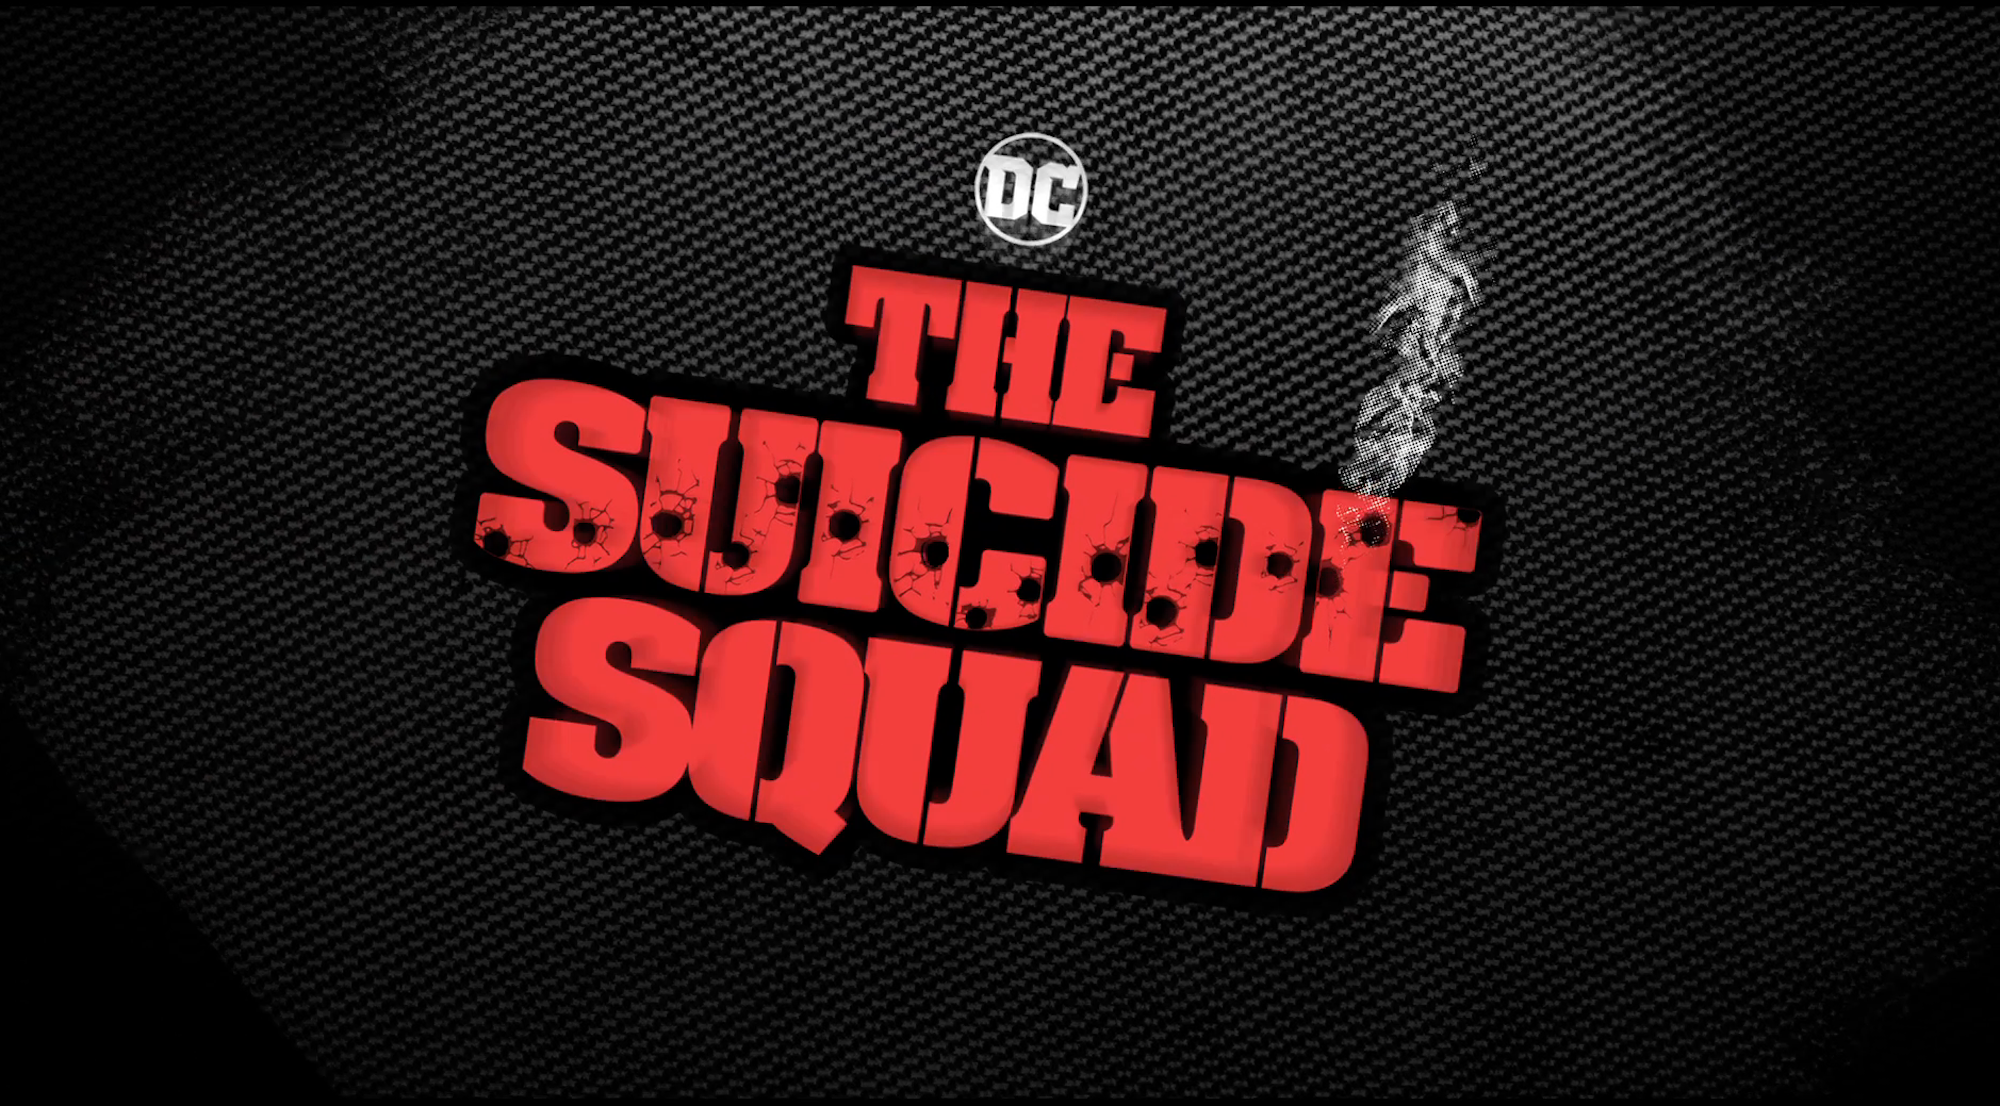 The new 'The Suicide Squad' logo revealed at DC FanDome.